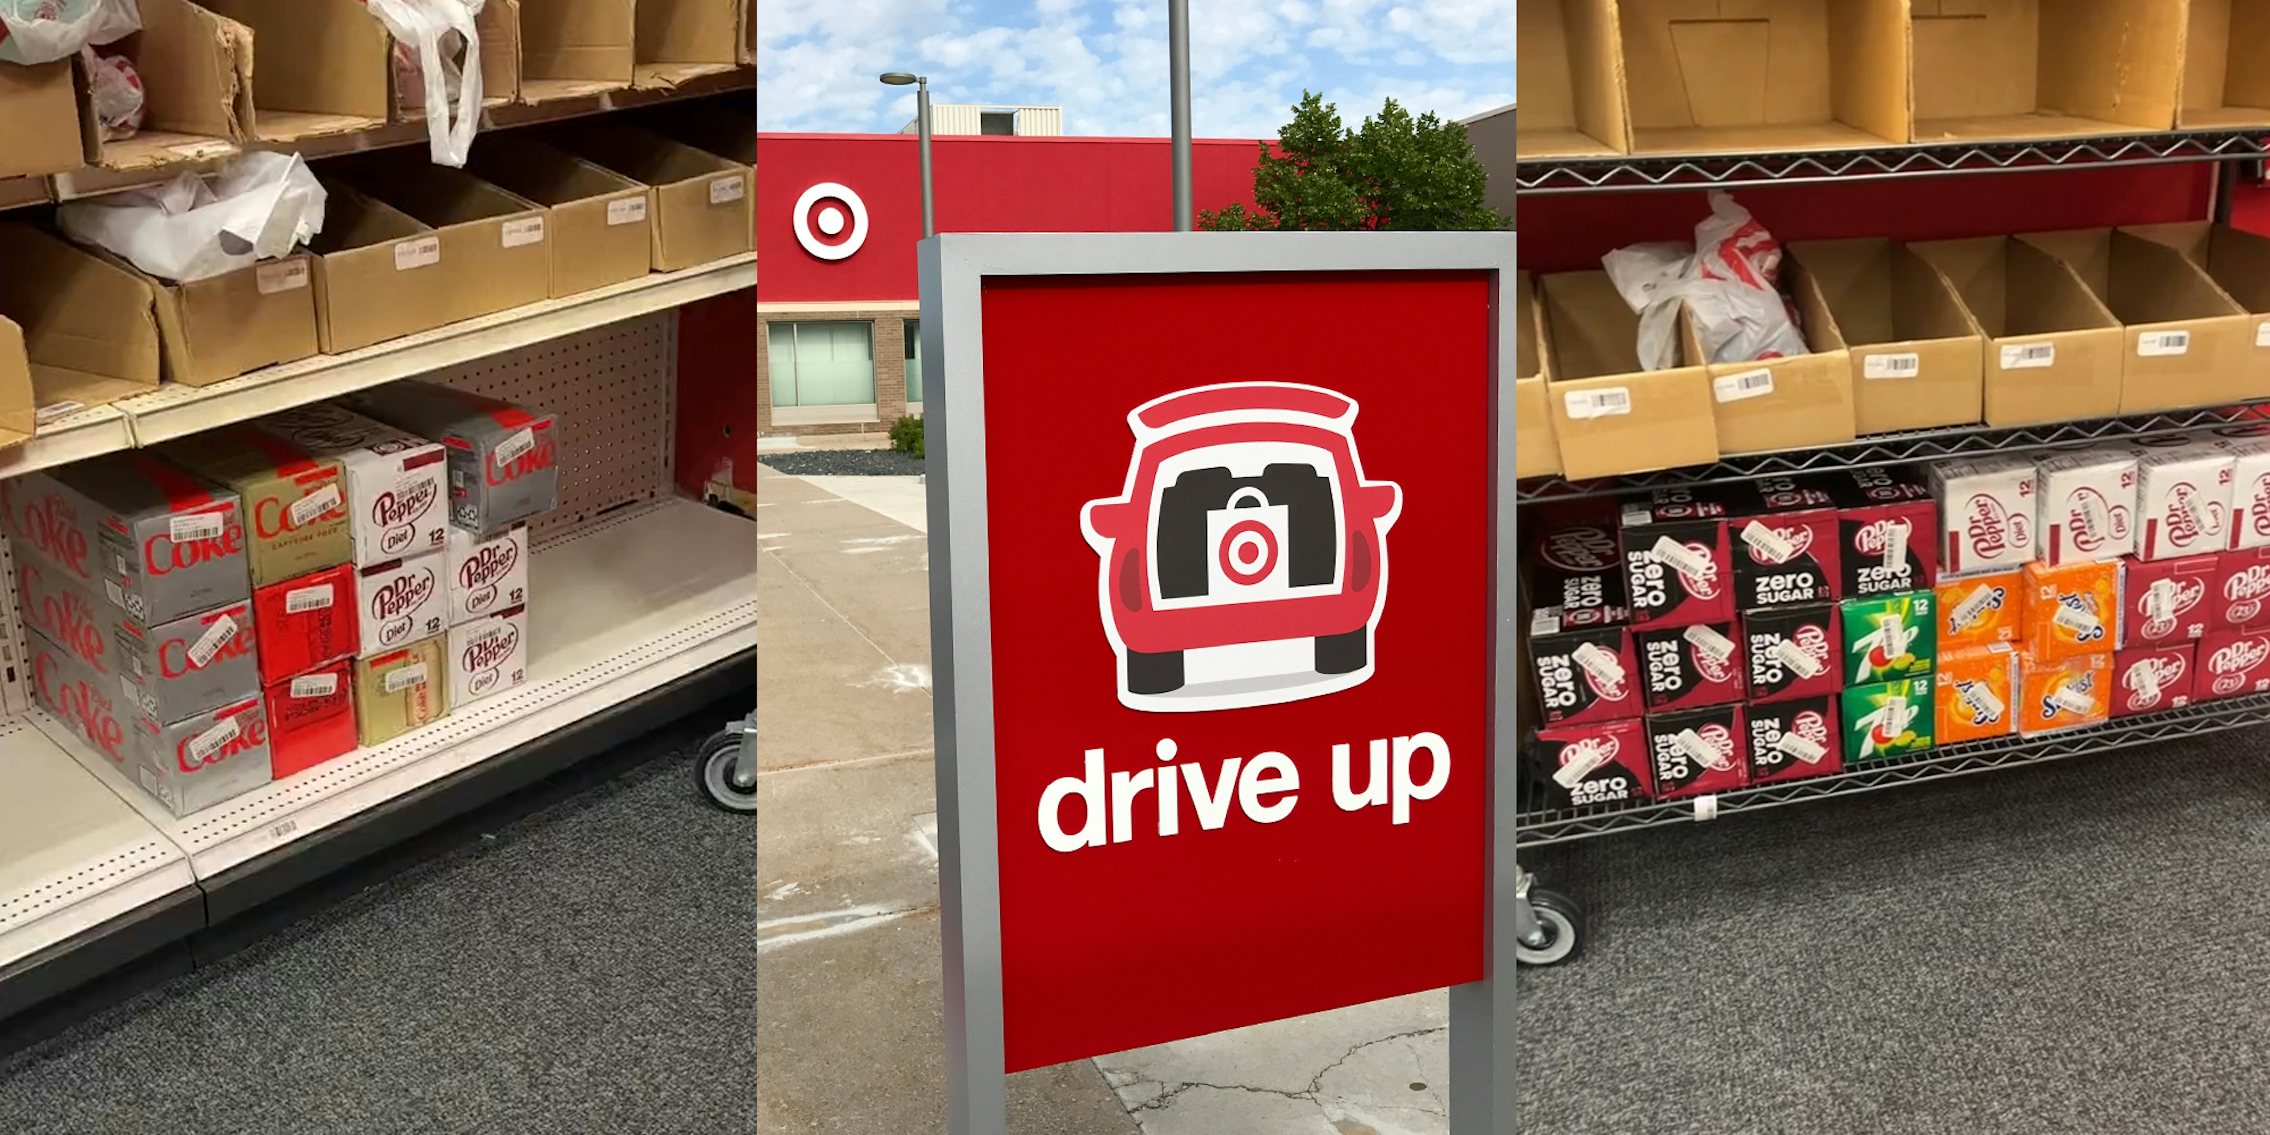 Target drive up shelves with cases of soda stacked on bottom shelf (l) Target drive up sign outside of Target building (c) Target drive up shelves with cases of soda stacked on bottom shelf (r)